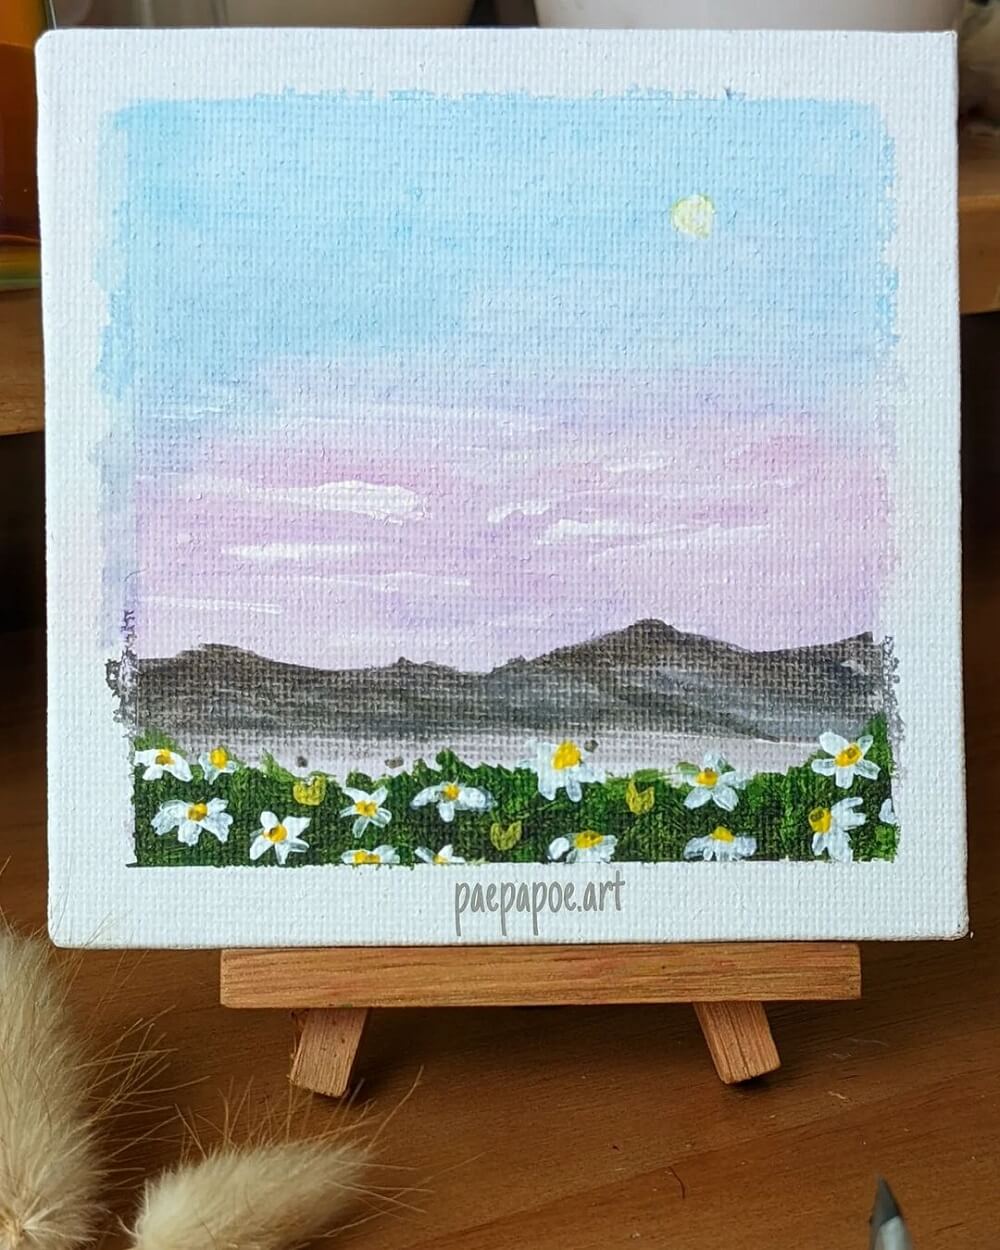 Spring time scene of mountains with pastel sky on a mini canvas.